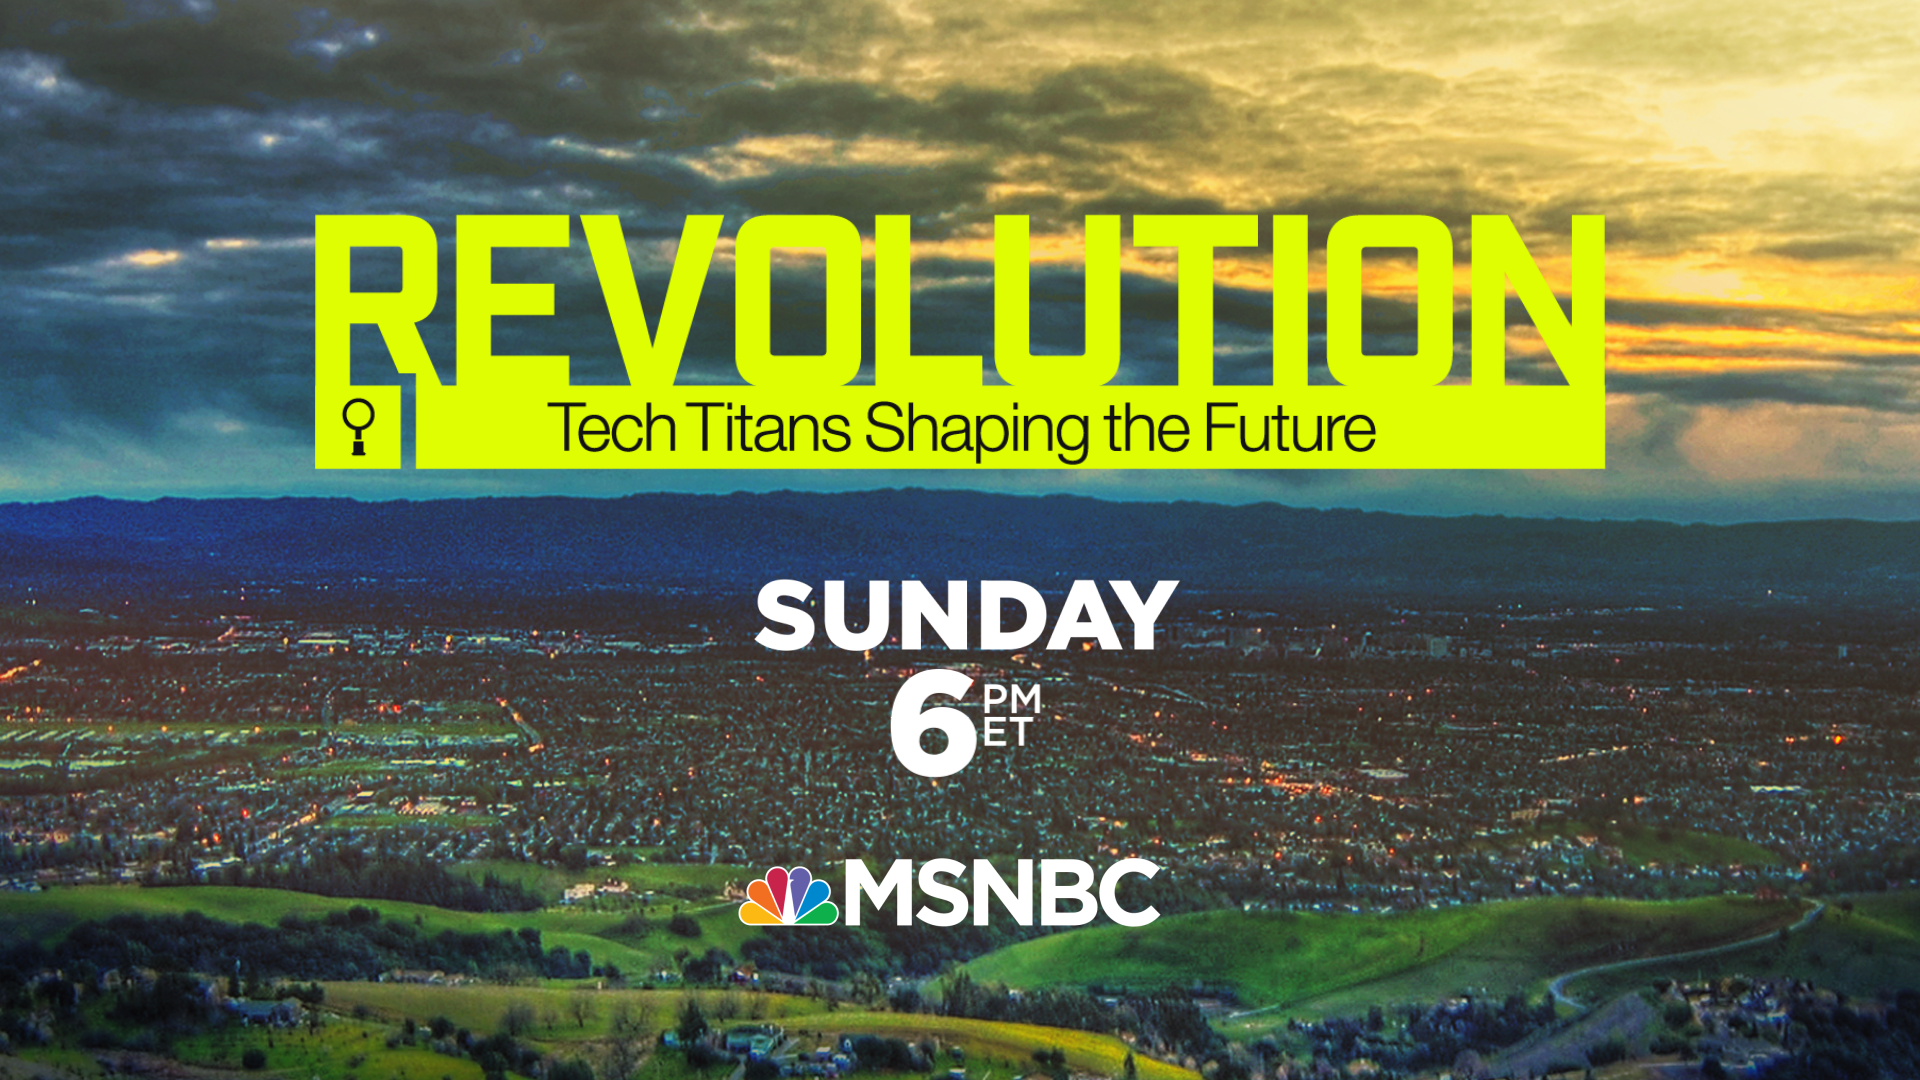 “Revolution: Tech Titans Shaping the Future,” Sunday at 6 on MSNBC